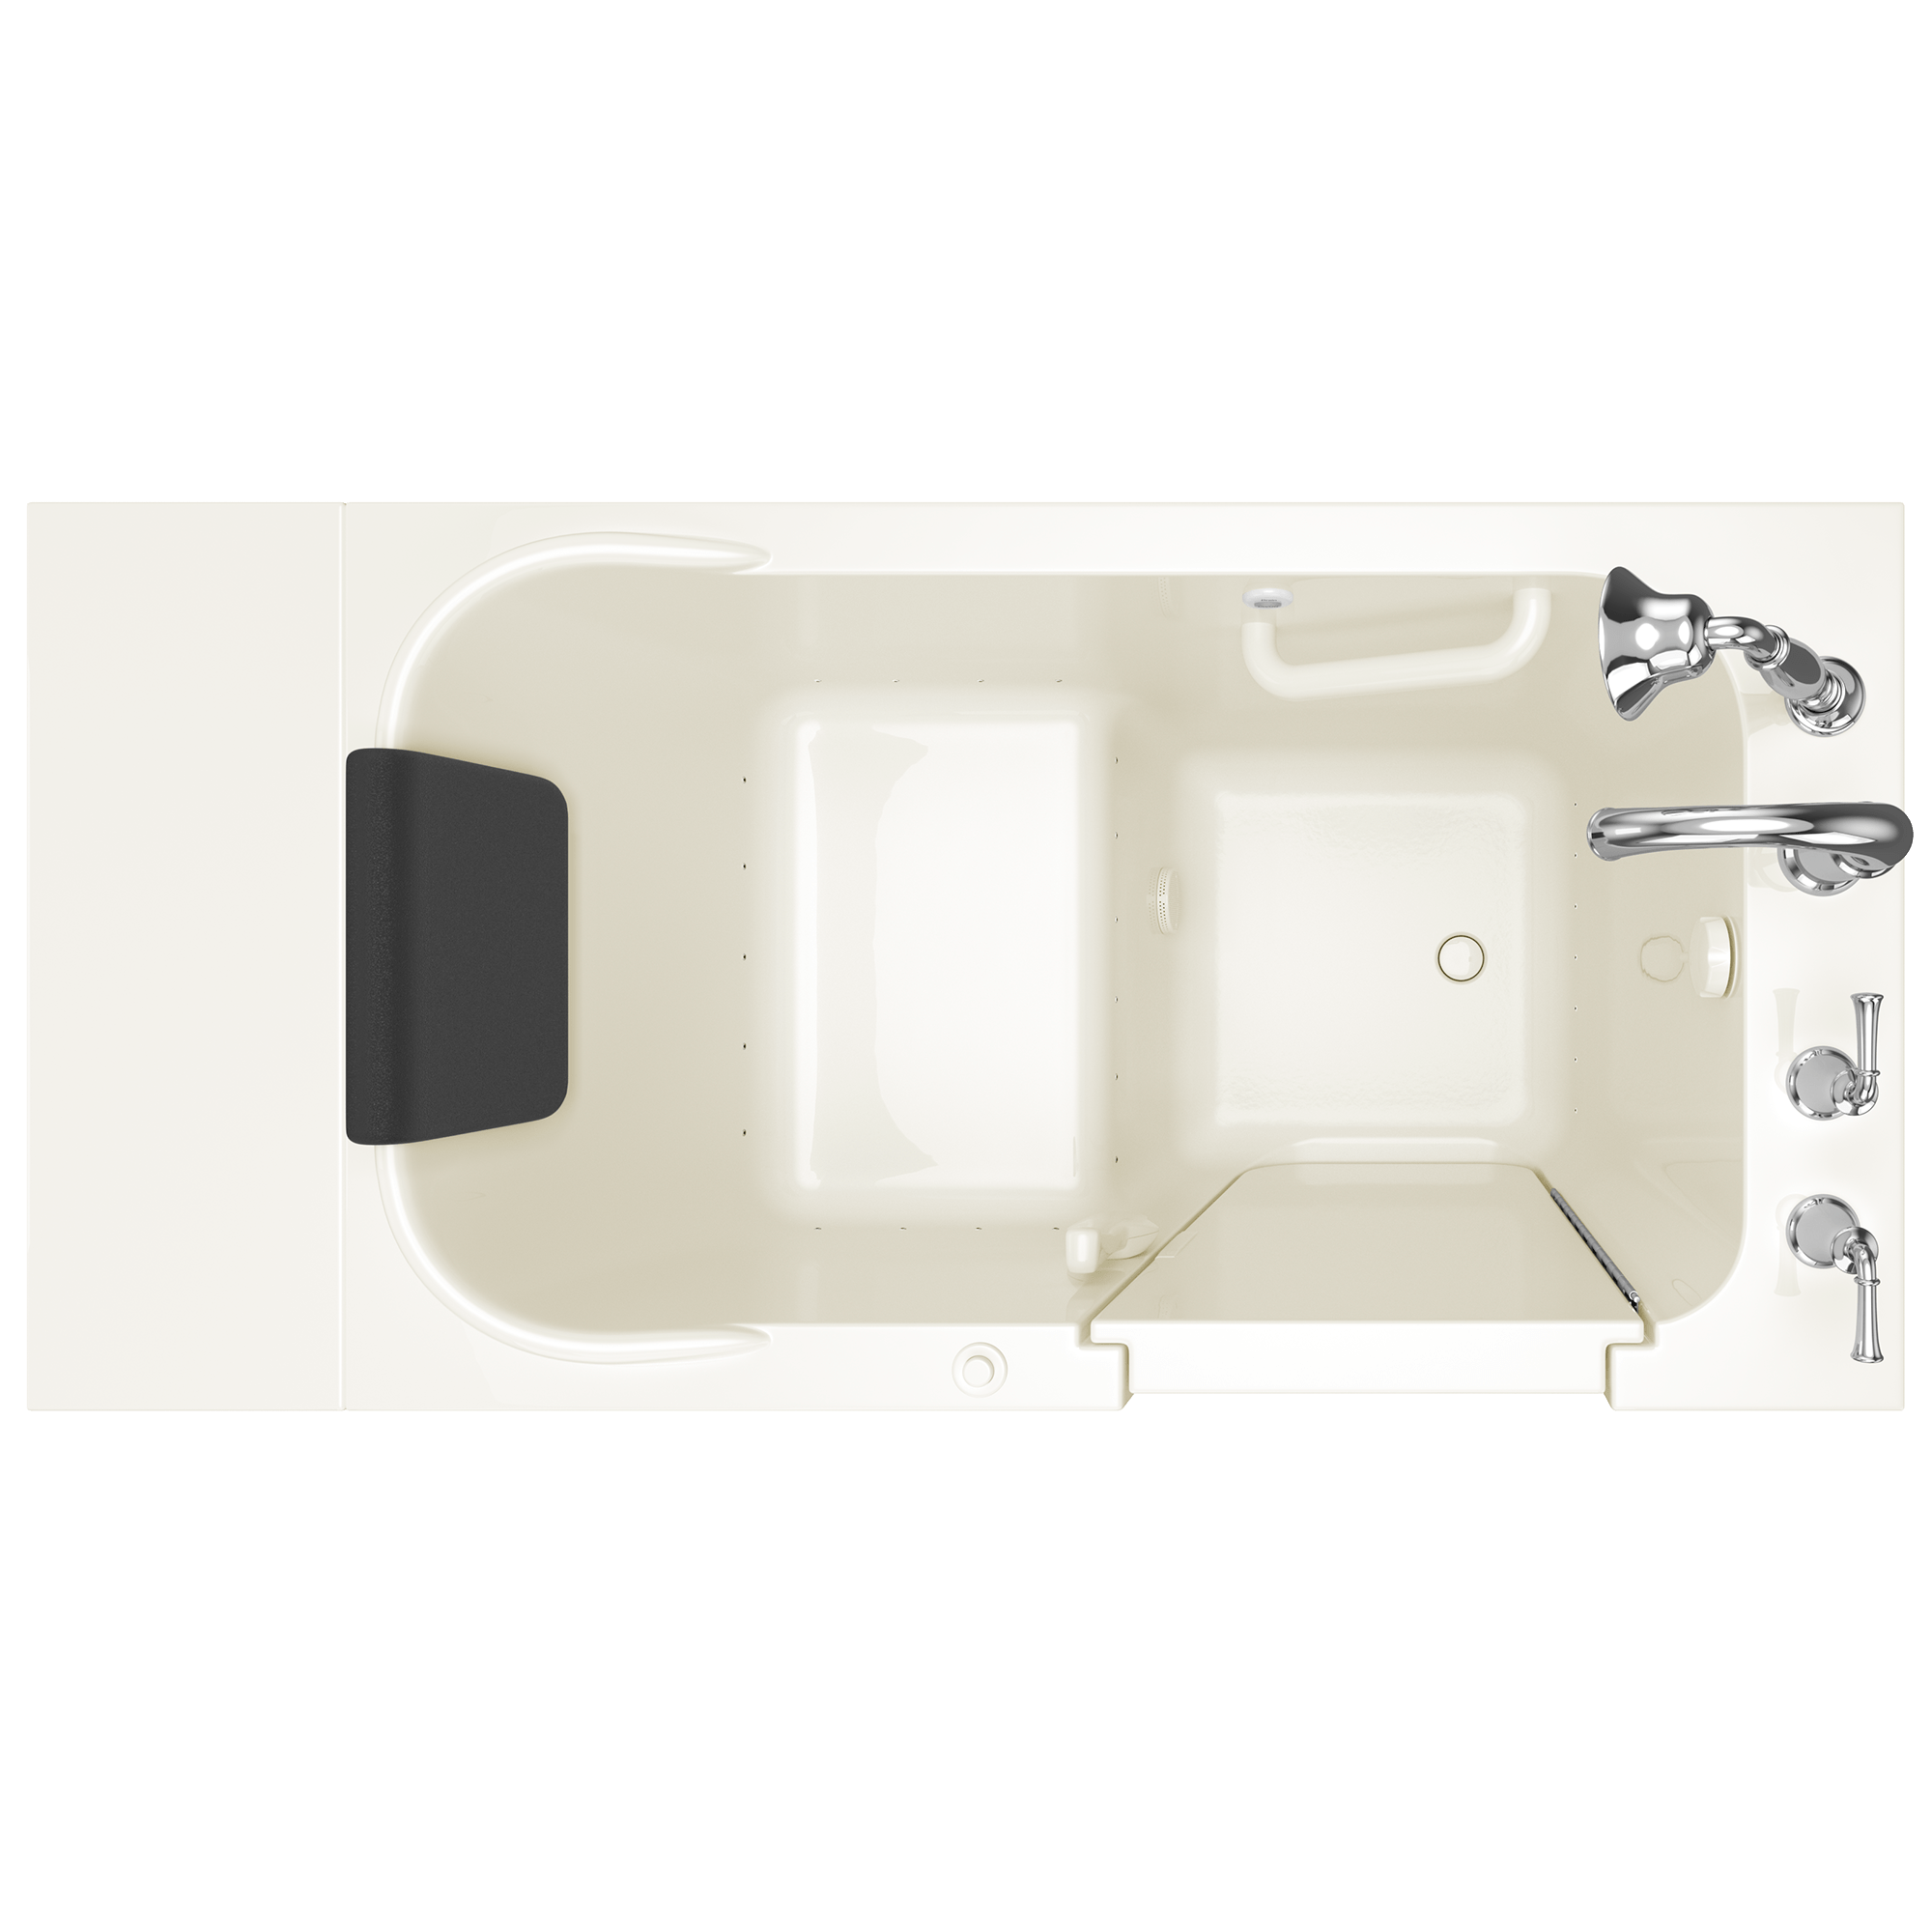 Gelcoat Premium Series 48x28 Inch Walk-In Bathtub with Air Massage System - Right Hand Door and Drain